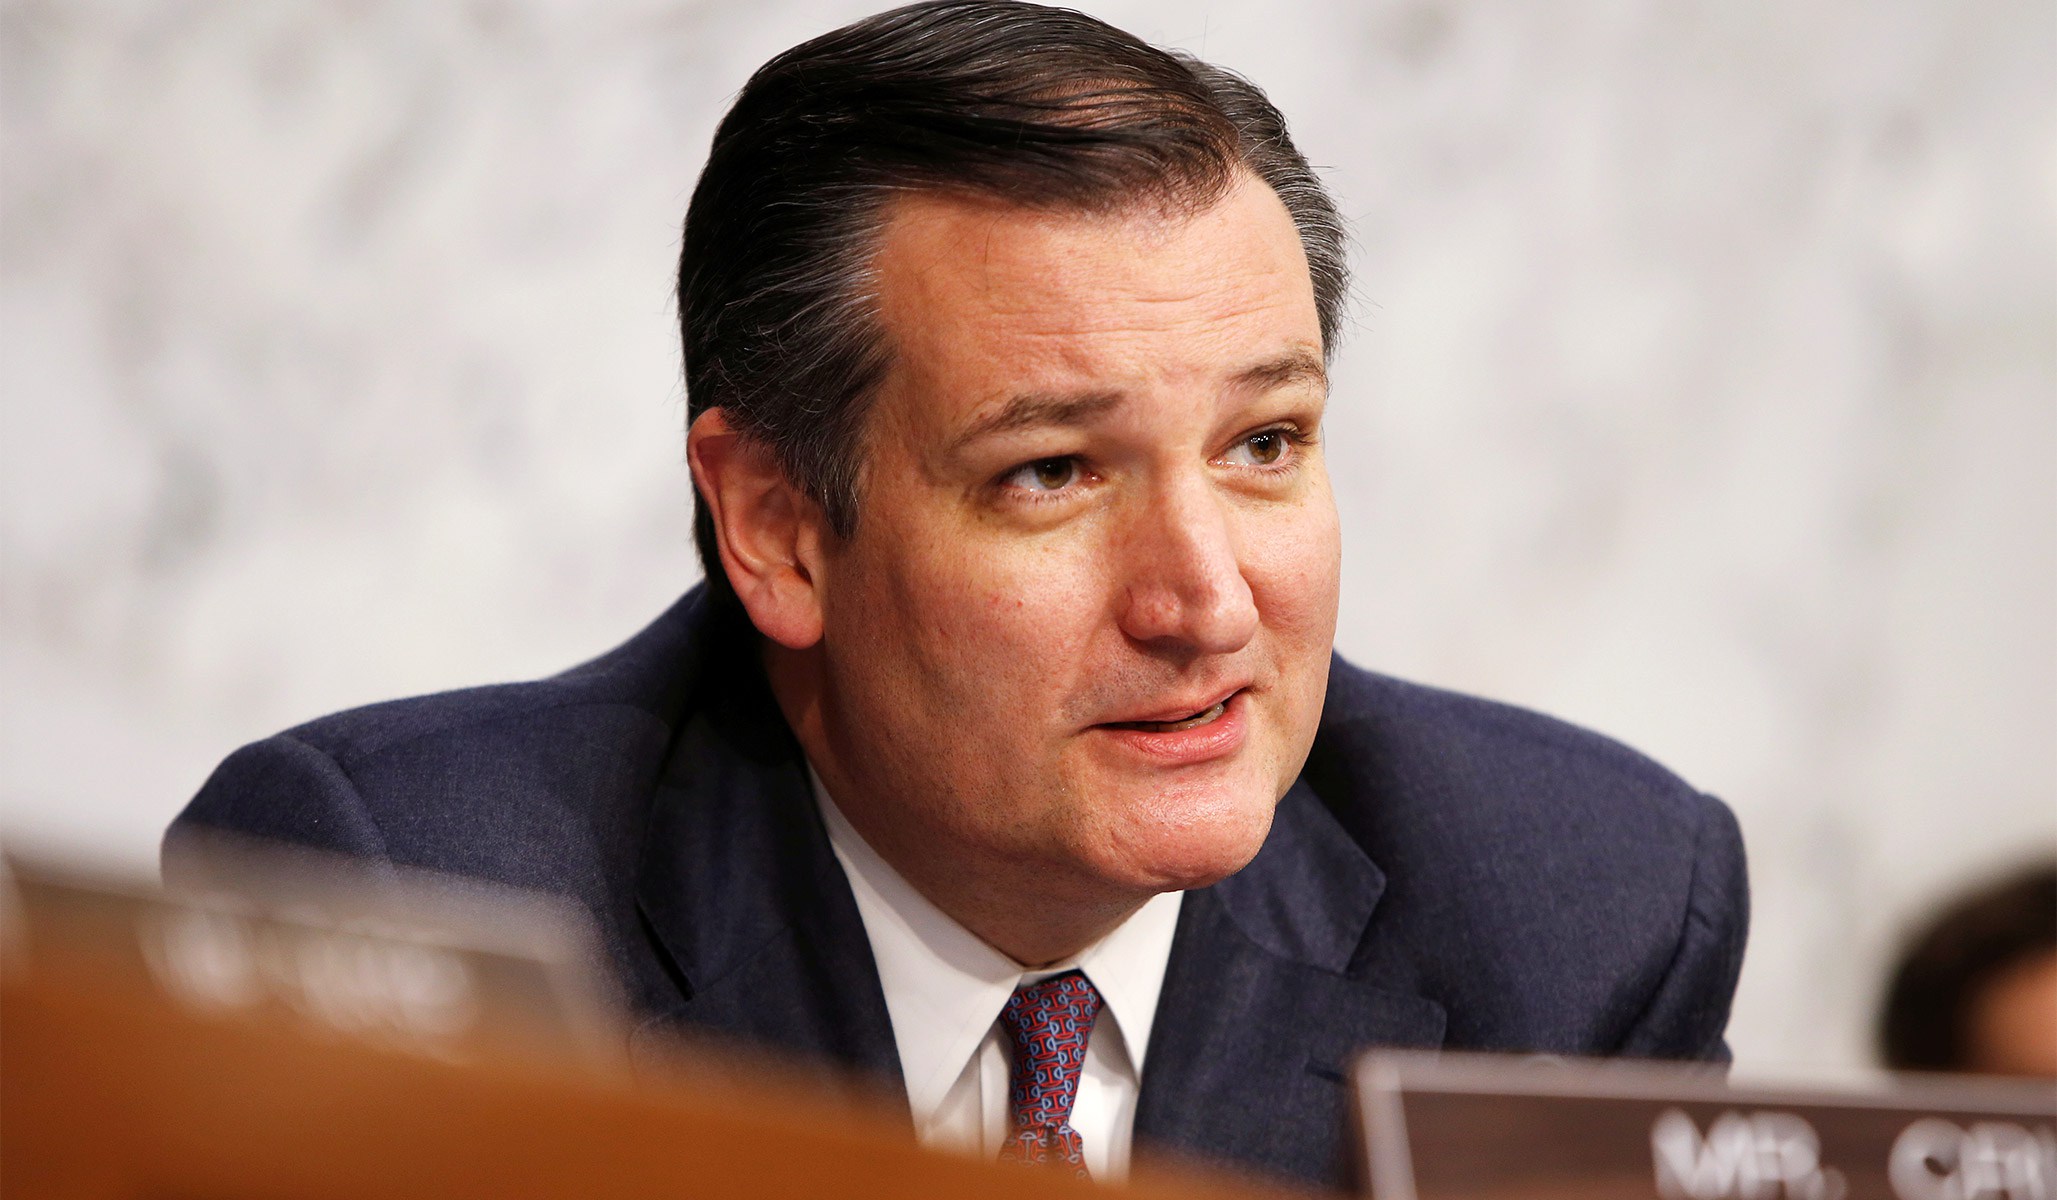 Ted Cruz on Capitol Hill